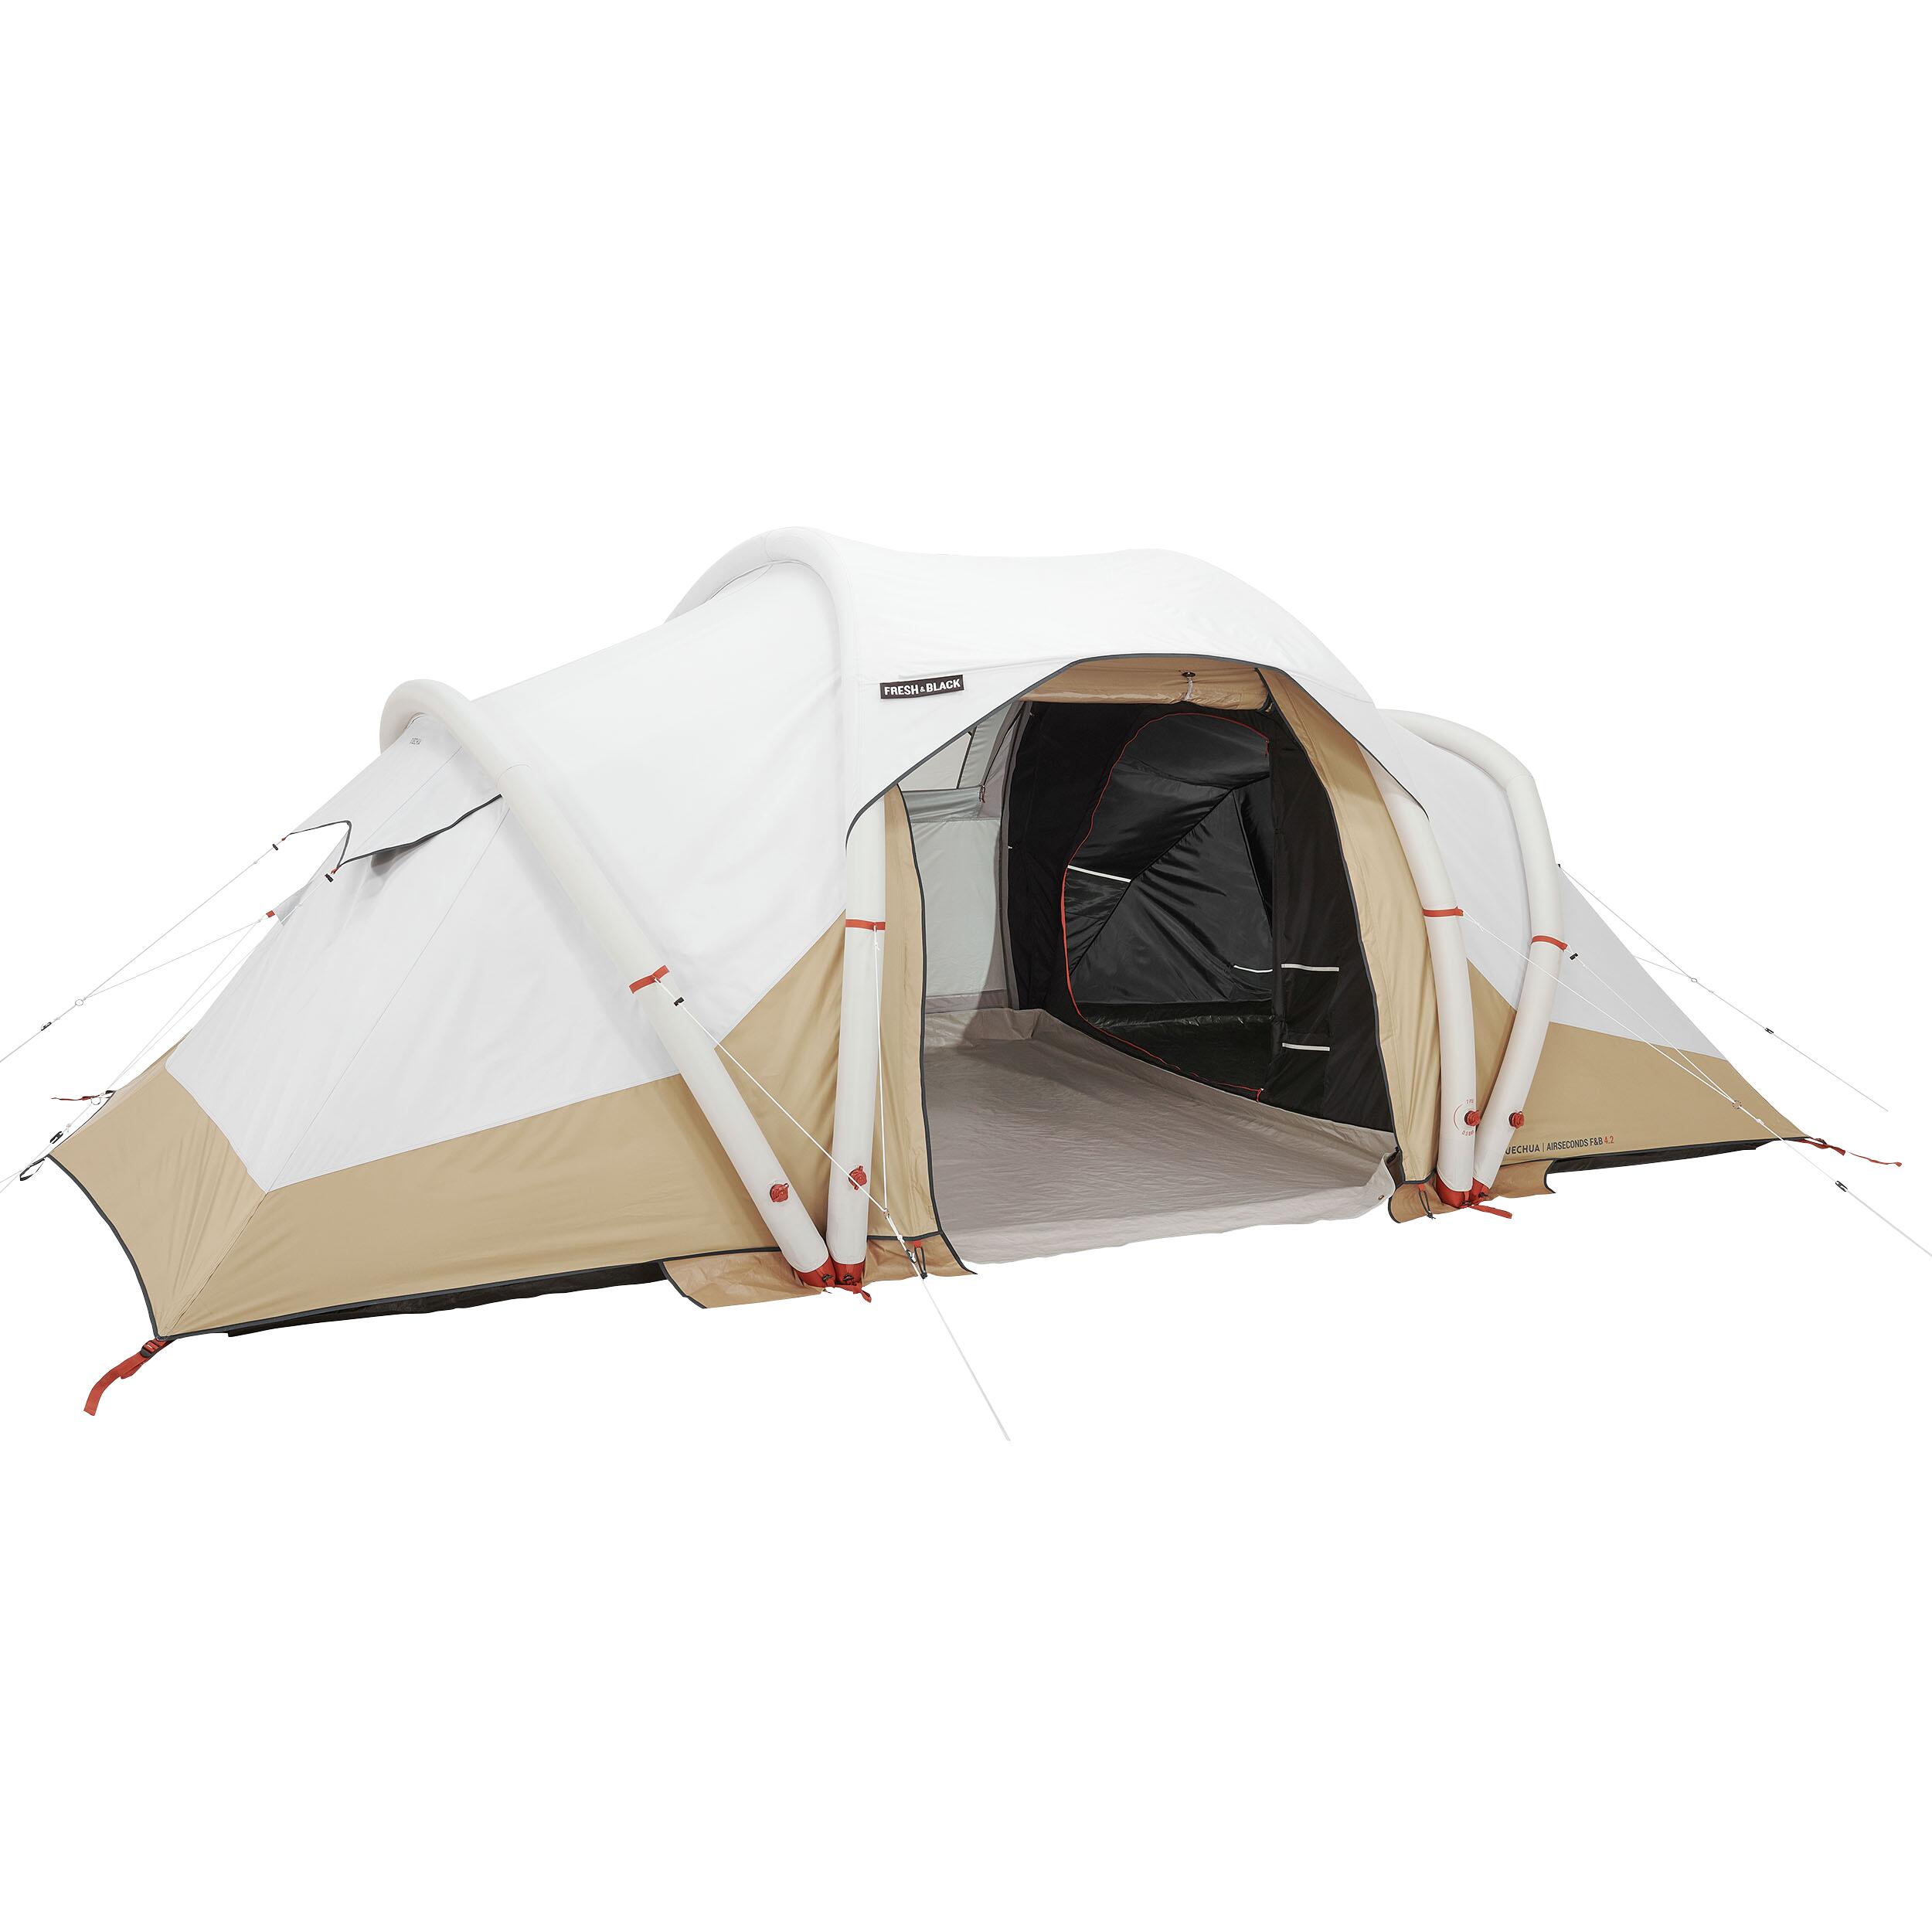 BEDROOM - REPLACEMENT PART FOR THE AIR SECONDS 4.2 FRESH&BLACK TENT 2/3